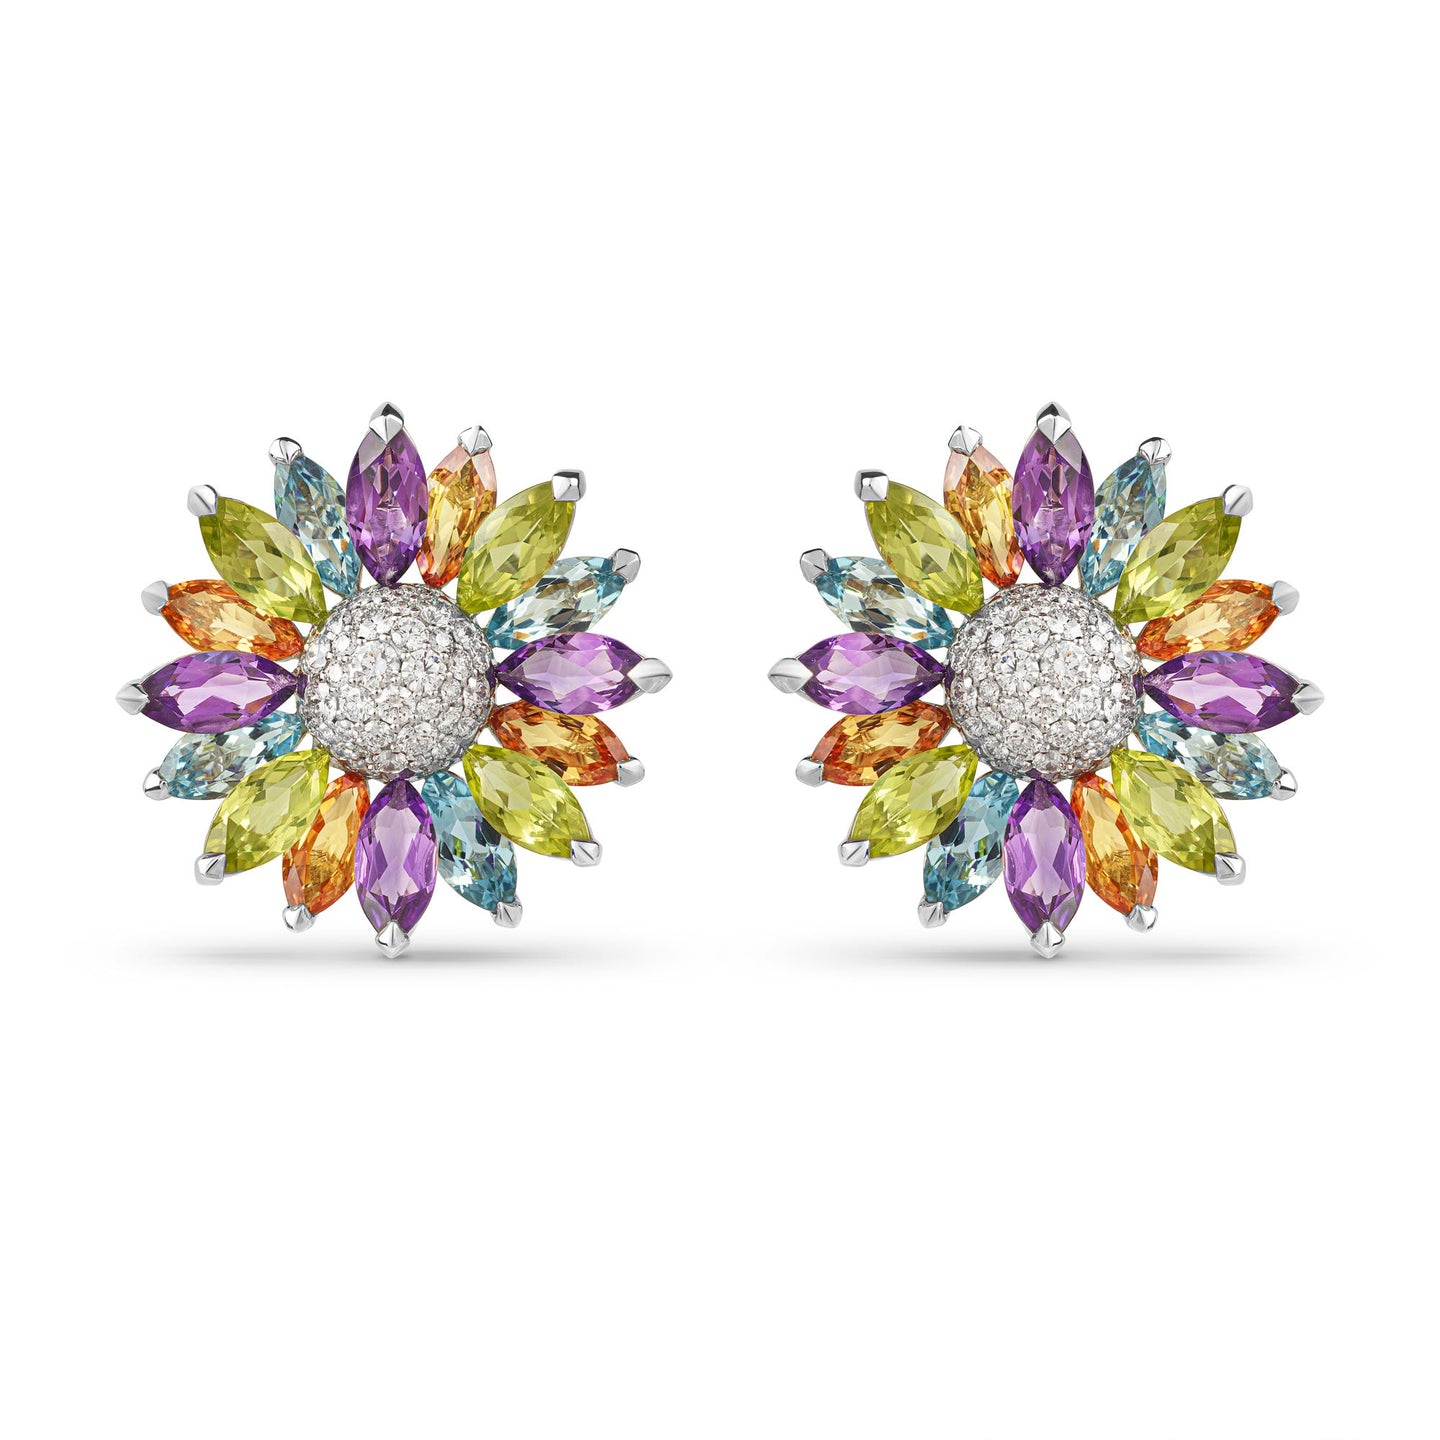 Daisy Medium Earrings in 18ct White Gold with Multicoloured Gemstones